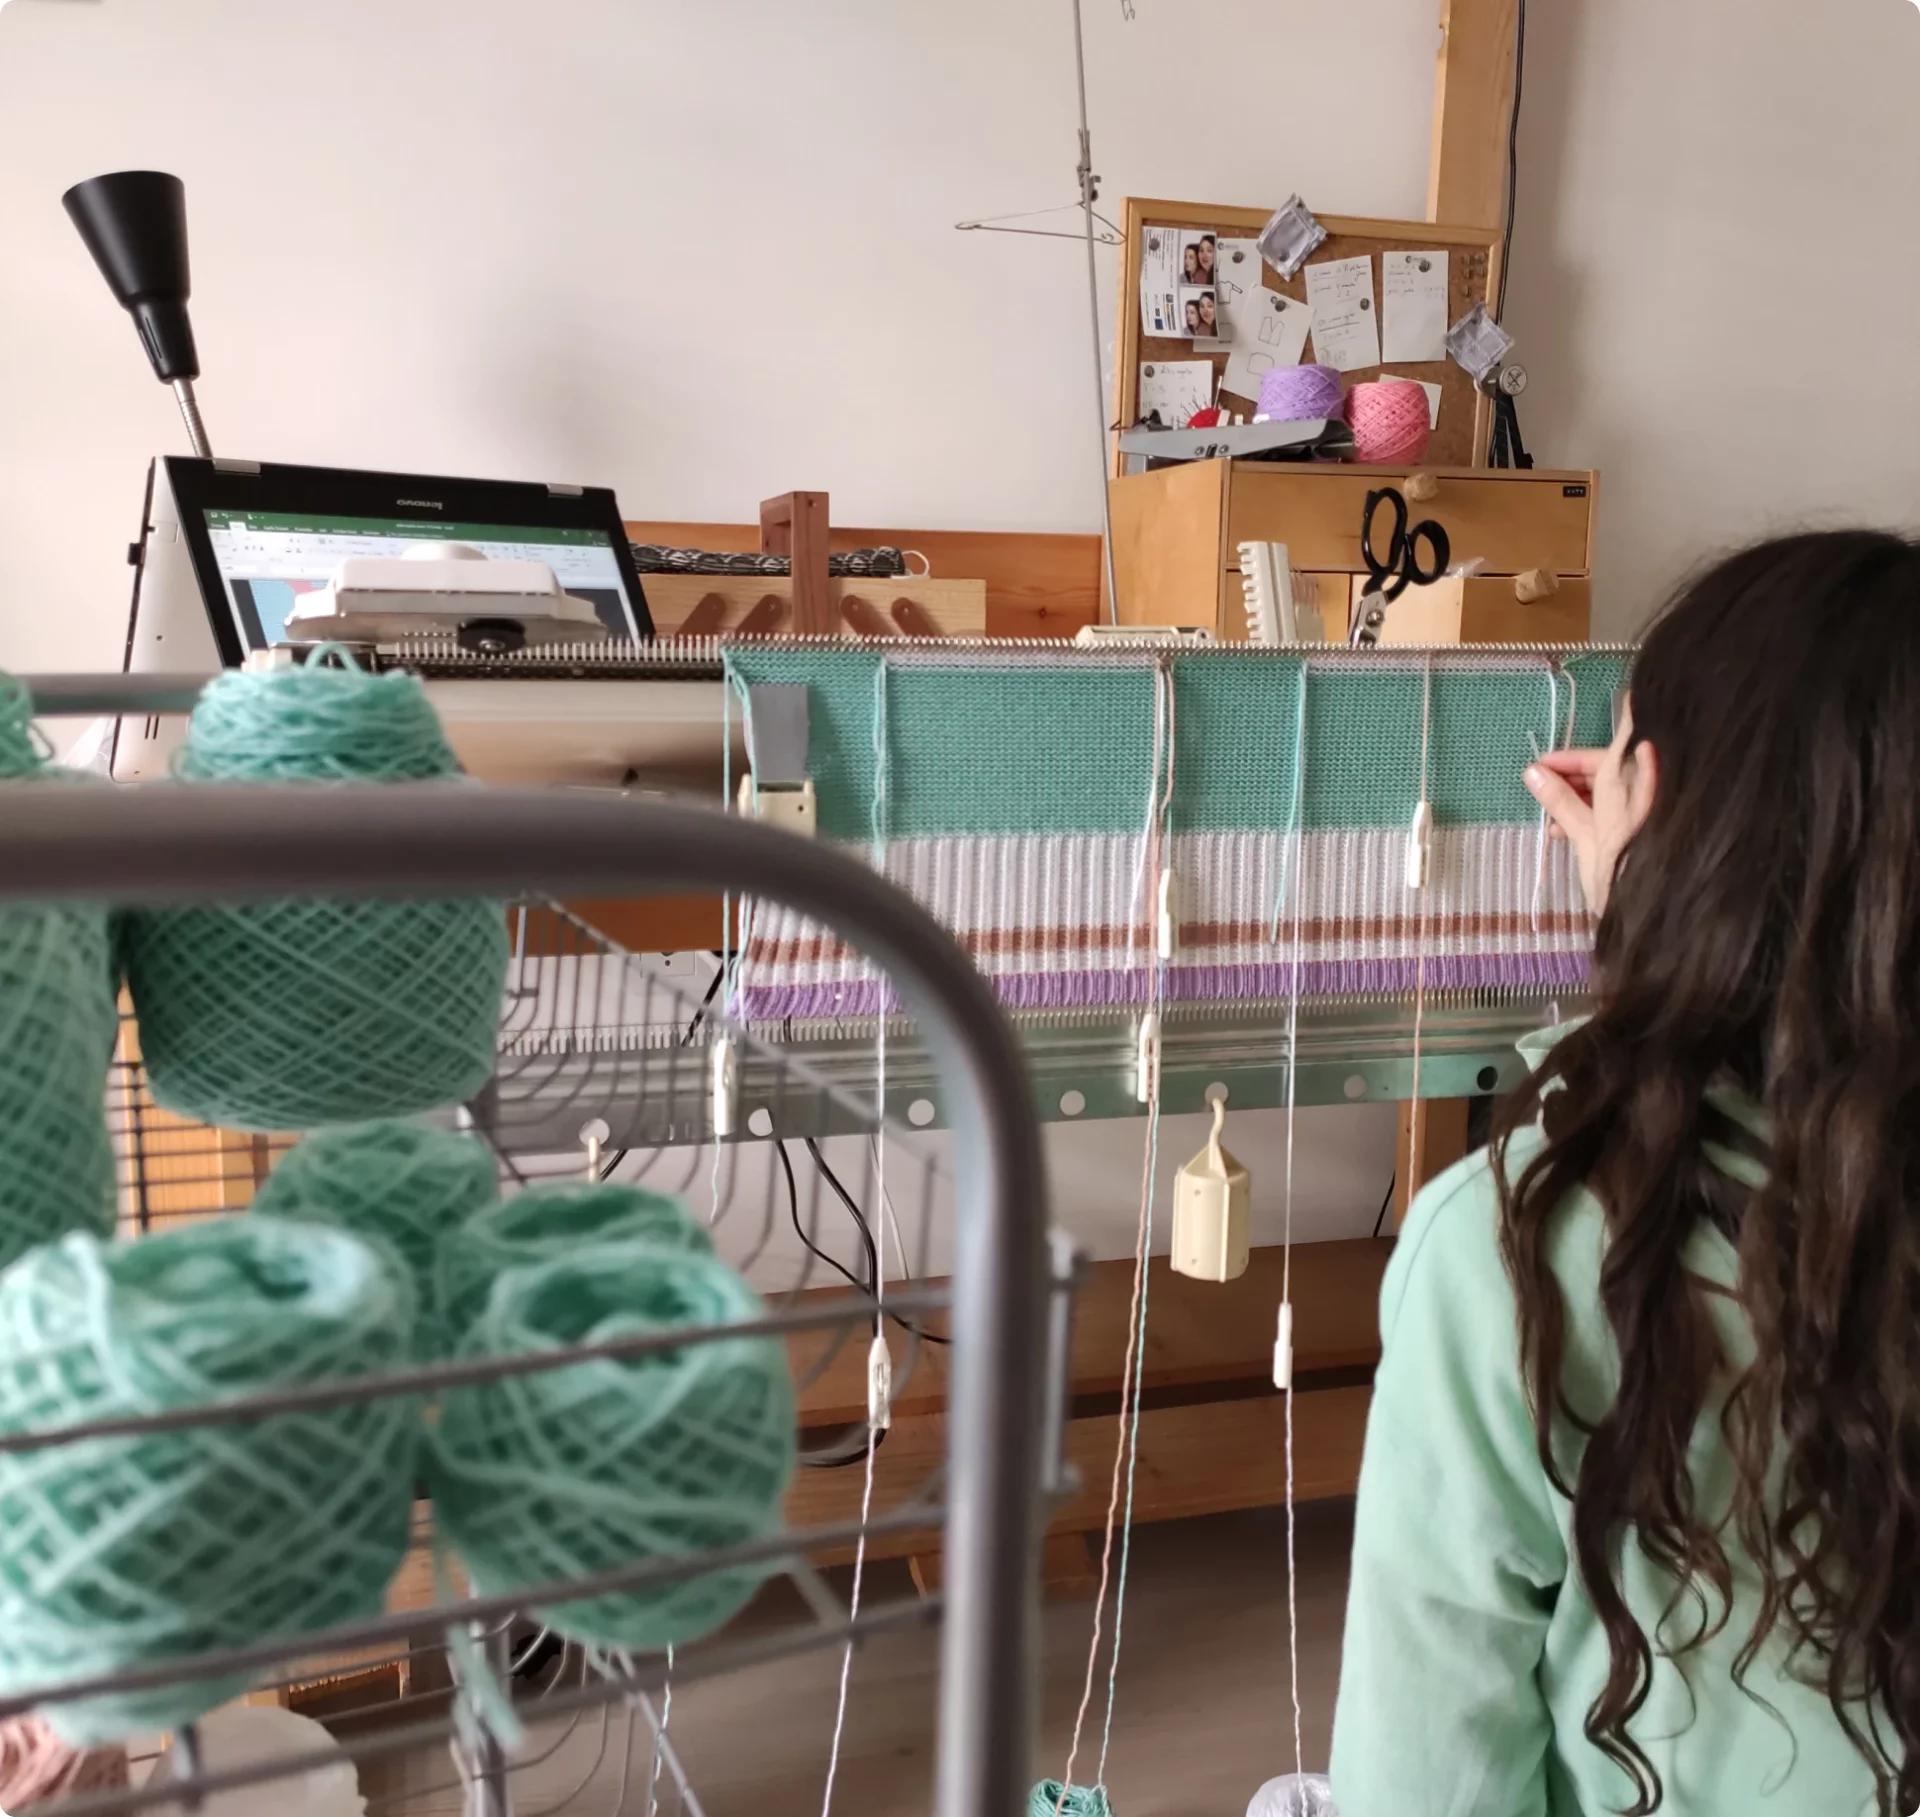 Knitter working on a vintage knitting machine, with mint coloured yarns.